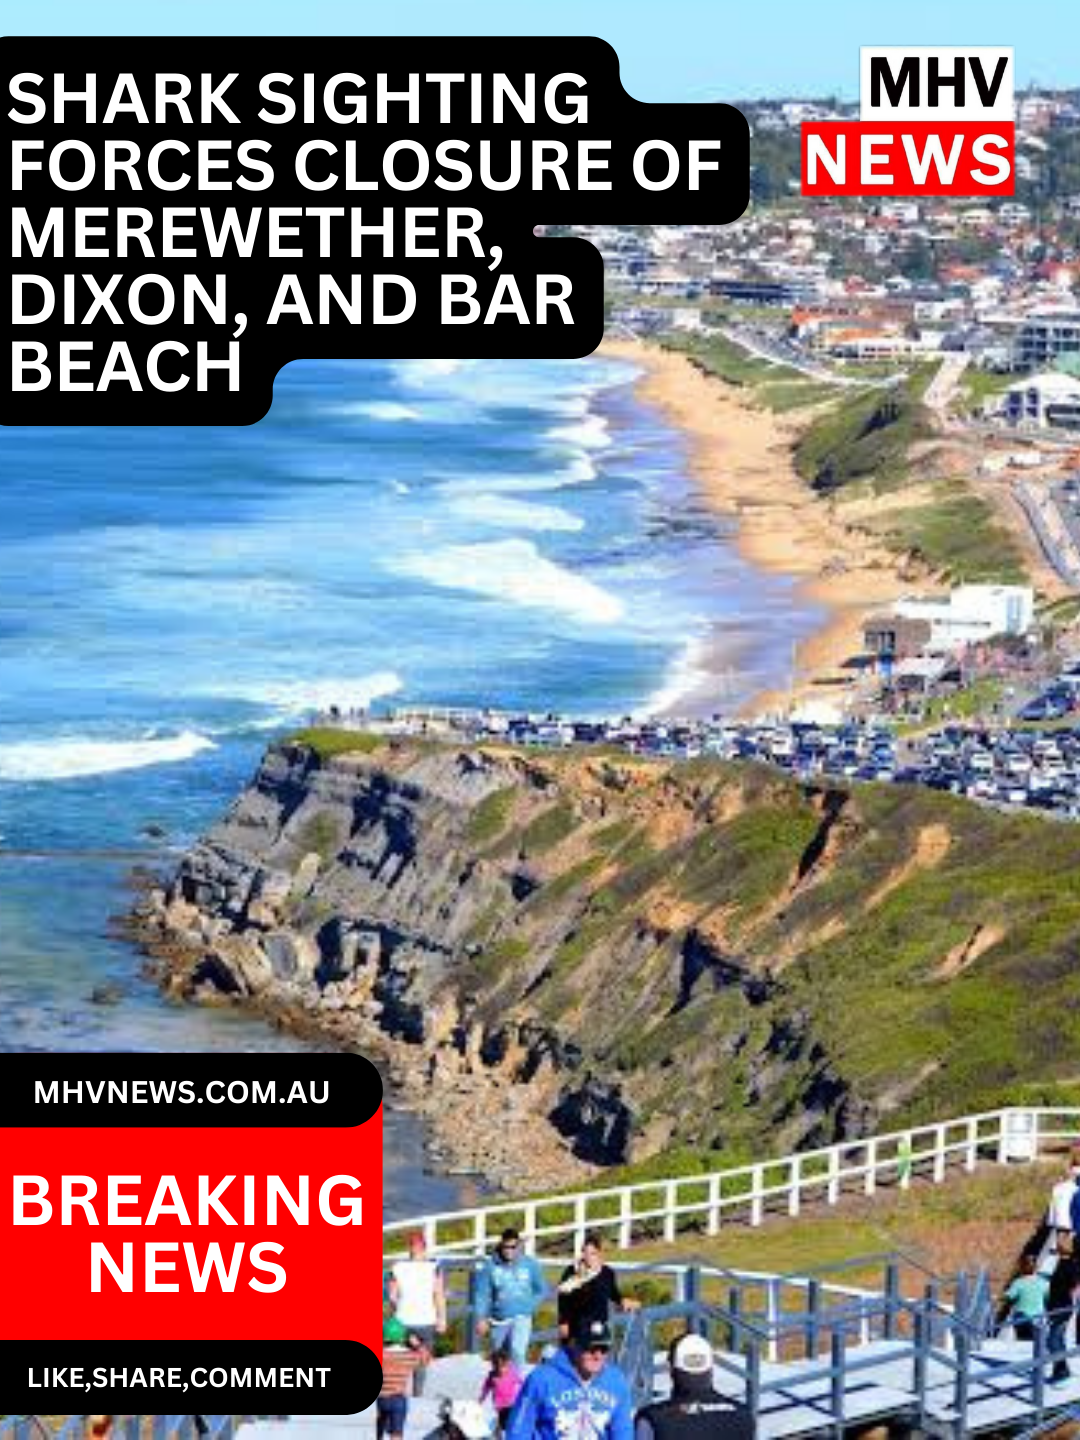 You are currently viewing Breaking News: Shark Sighting Forces Closure of Merewether, Dixon, and Bar Beach